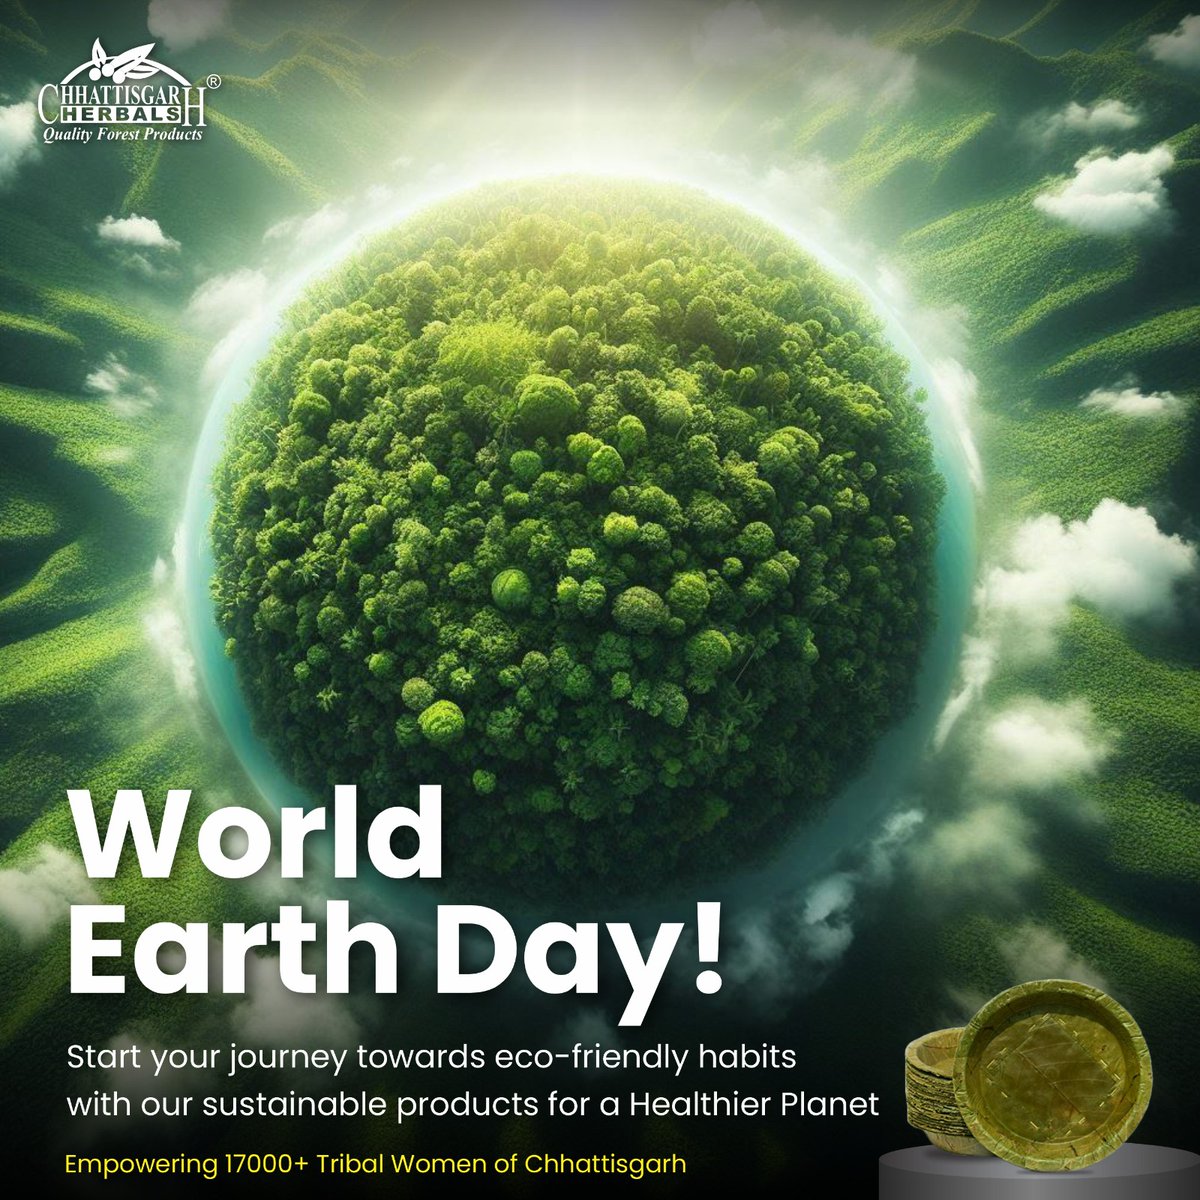 Start using sustainable & eco-friendly products for a healthier planet.
#WorldEarthDay2024

chhattisgarhherbal.com
#cgherbals #naturalproduct #forestproduce #sustainableproducts #WorldEarthDay #EarthDay #saveplanetearth #savetheplanet  #ecoconscious #EcoFriendly